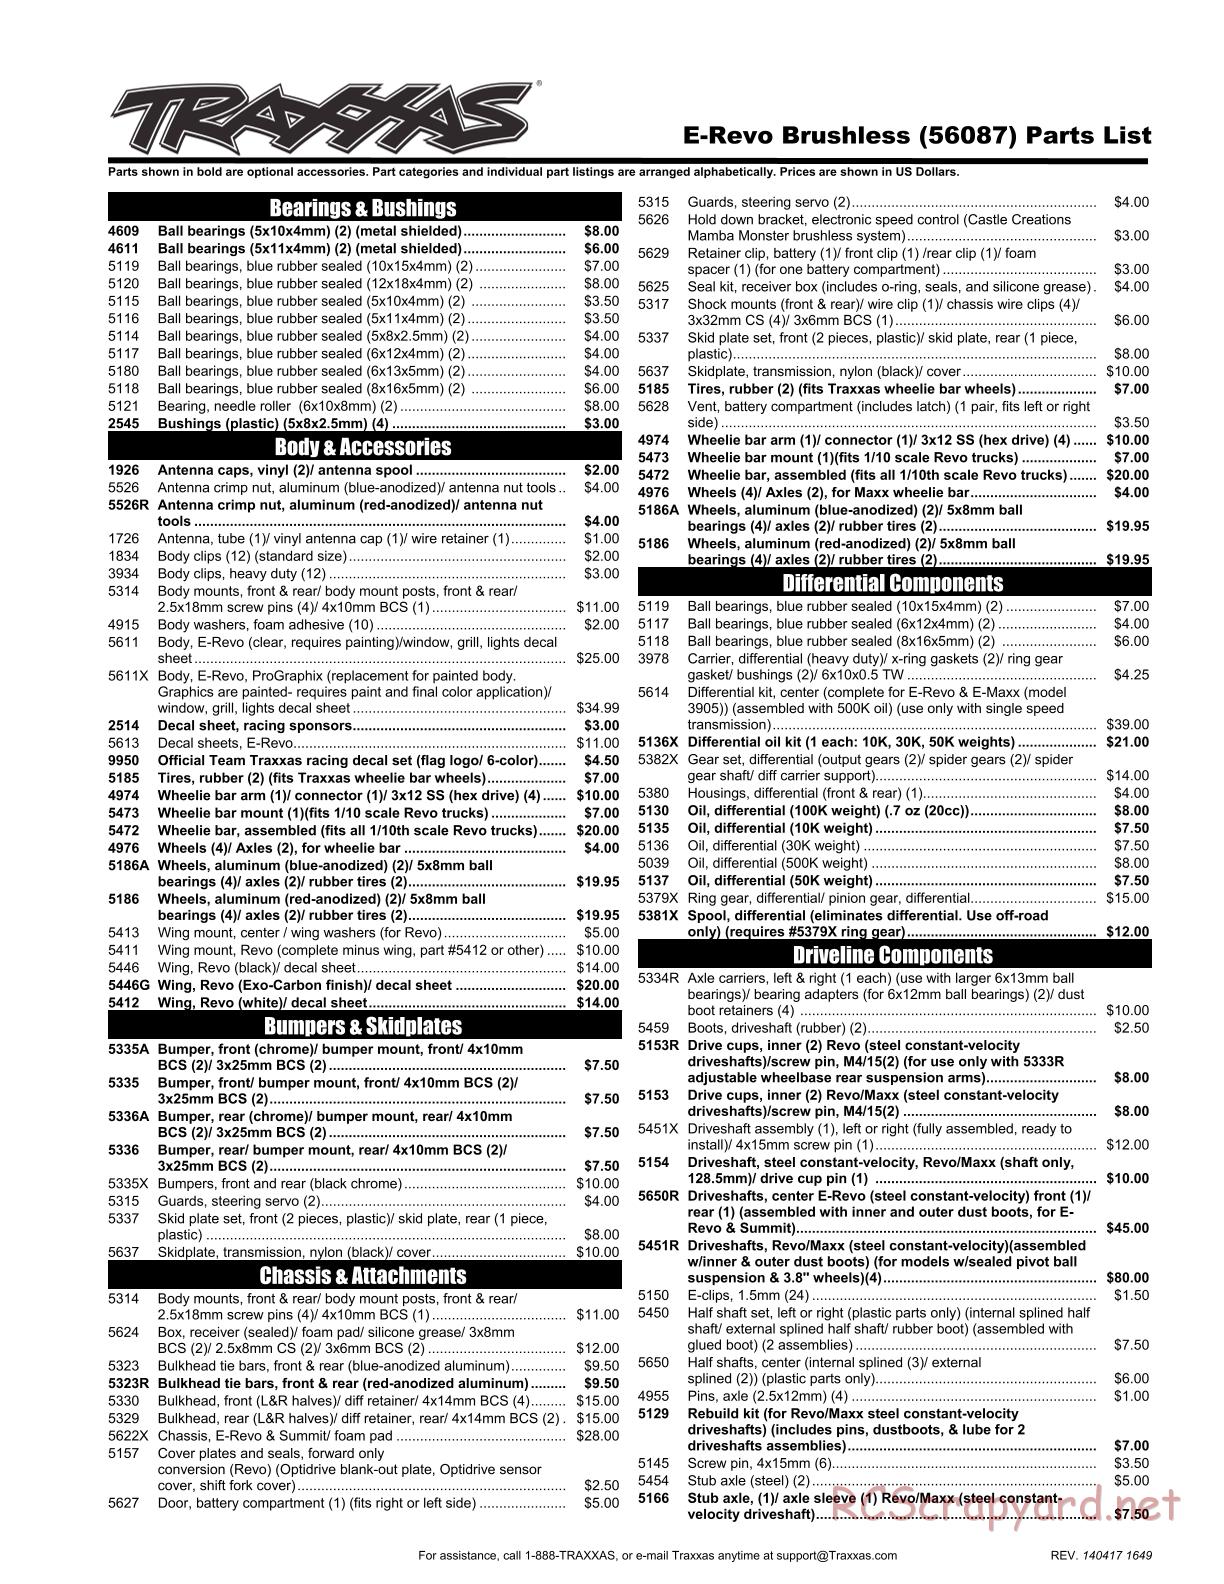 Traxxas - E-Revo Brushless (2014) - Parts List - Page 1